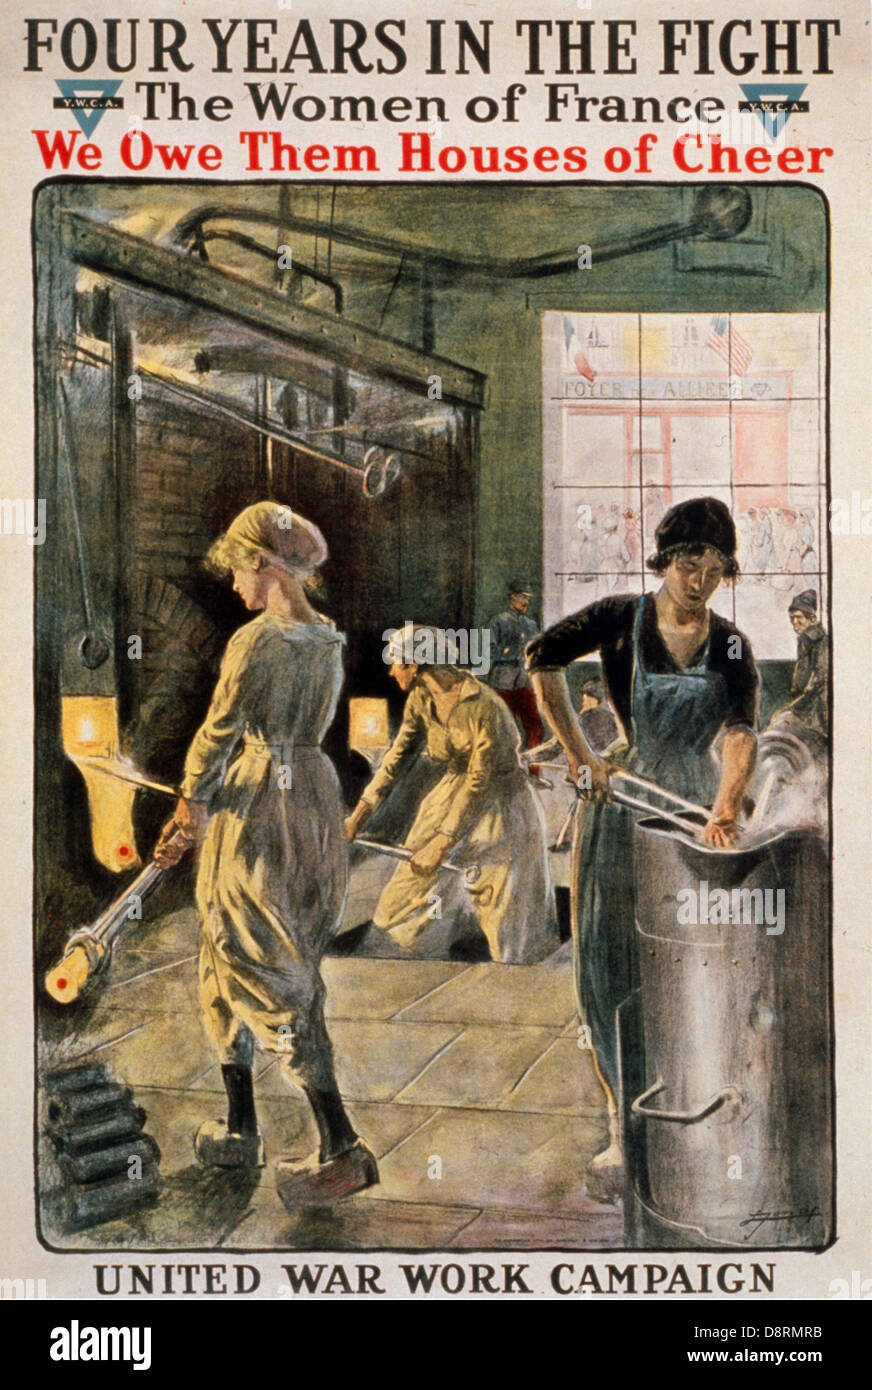 Four Years in the Fight - The Women of France 1918 American Propaganda poster Stock Photo